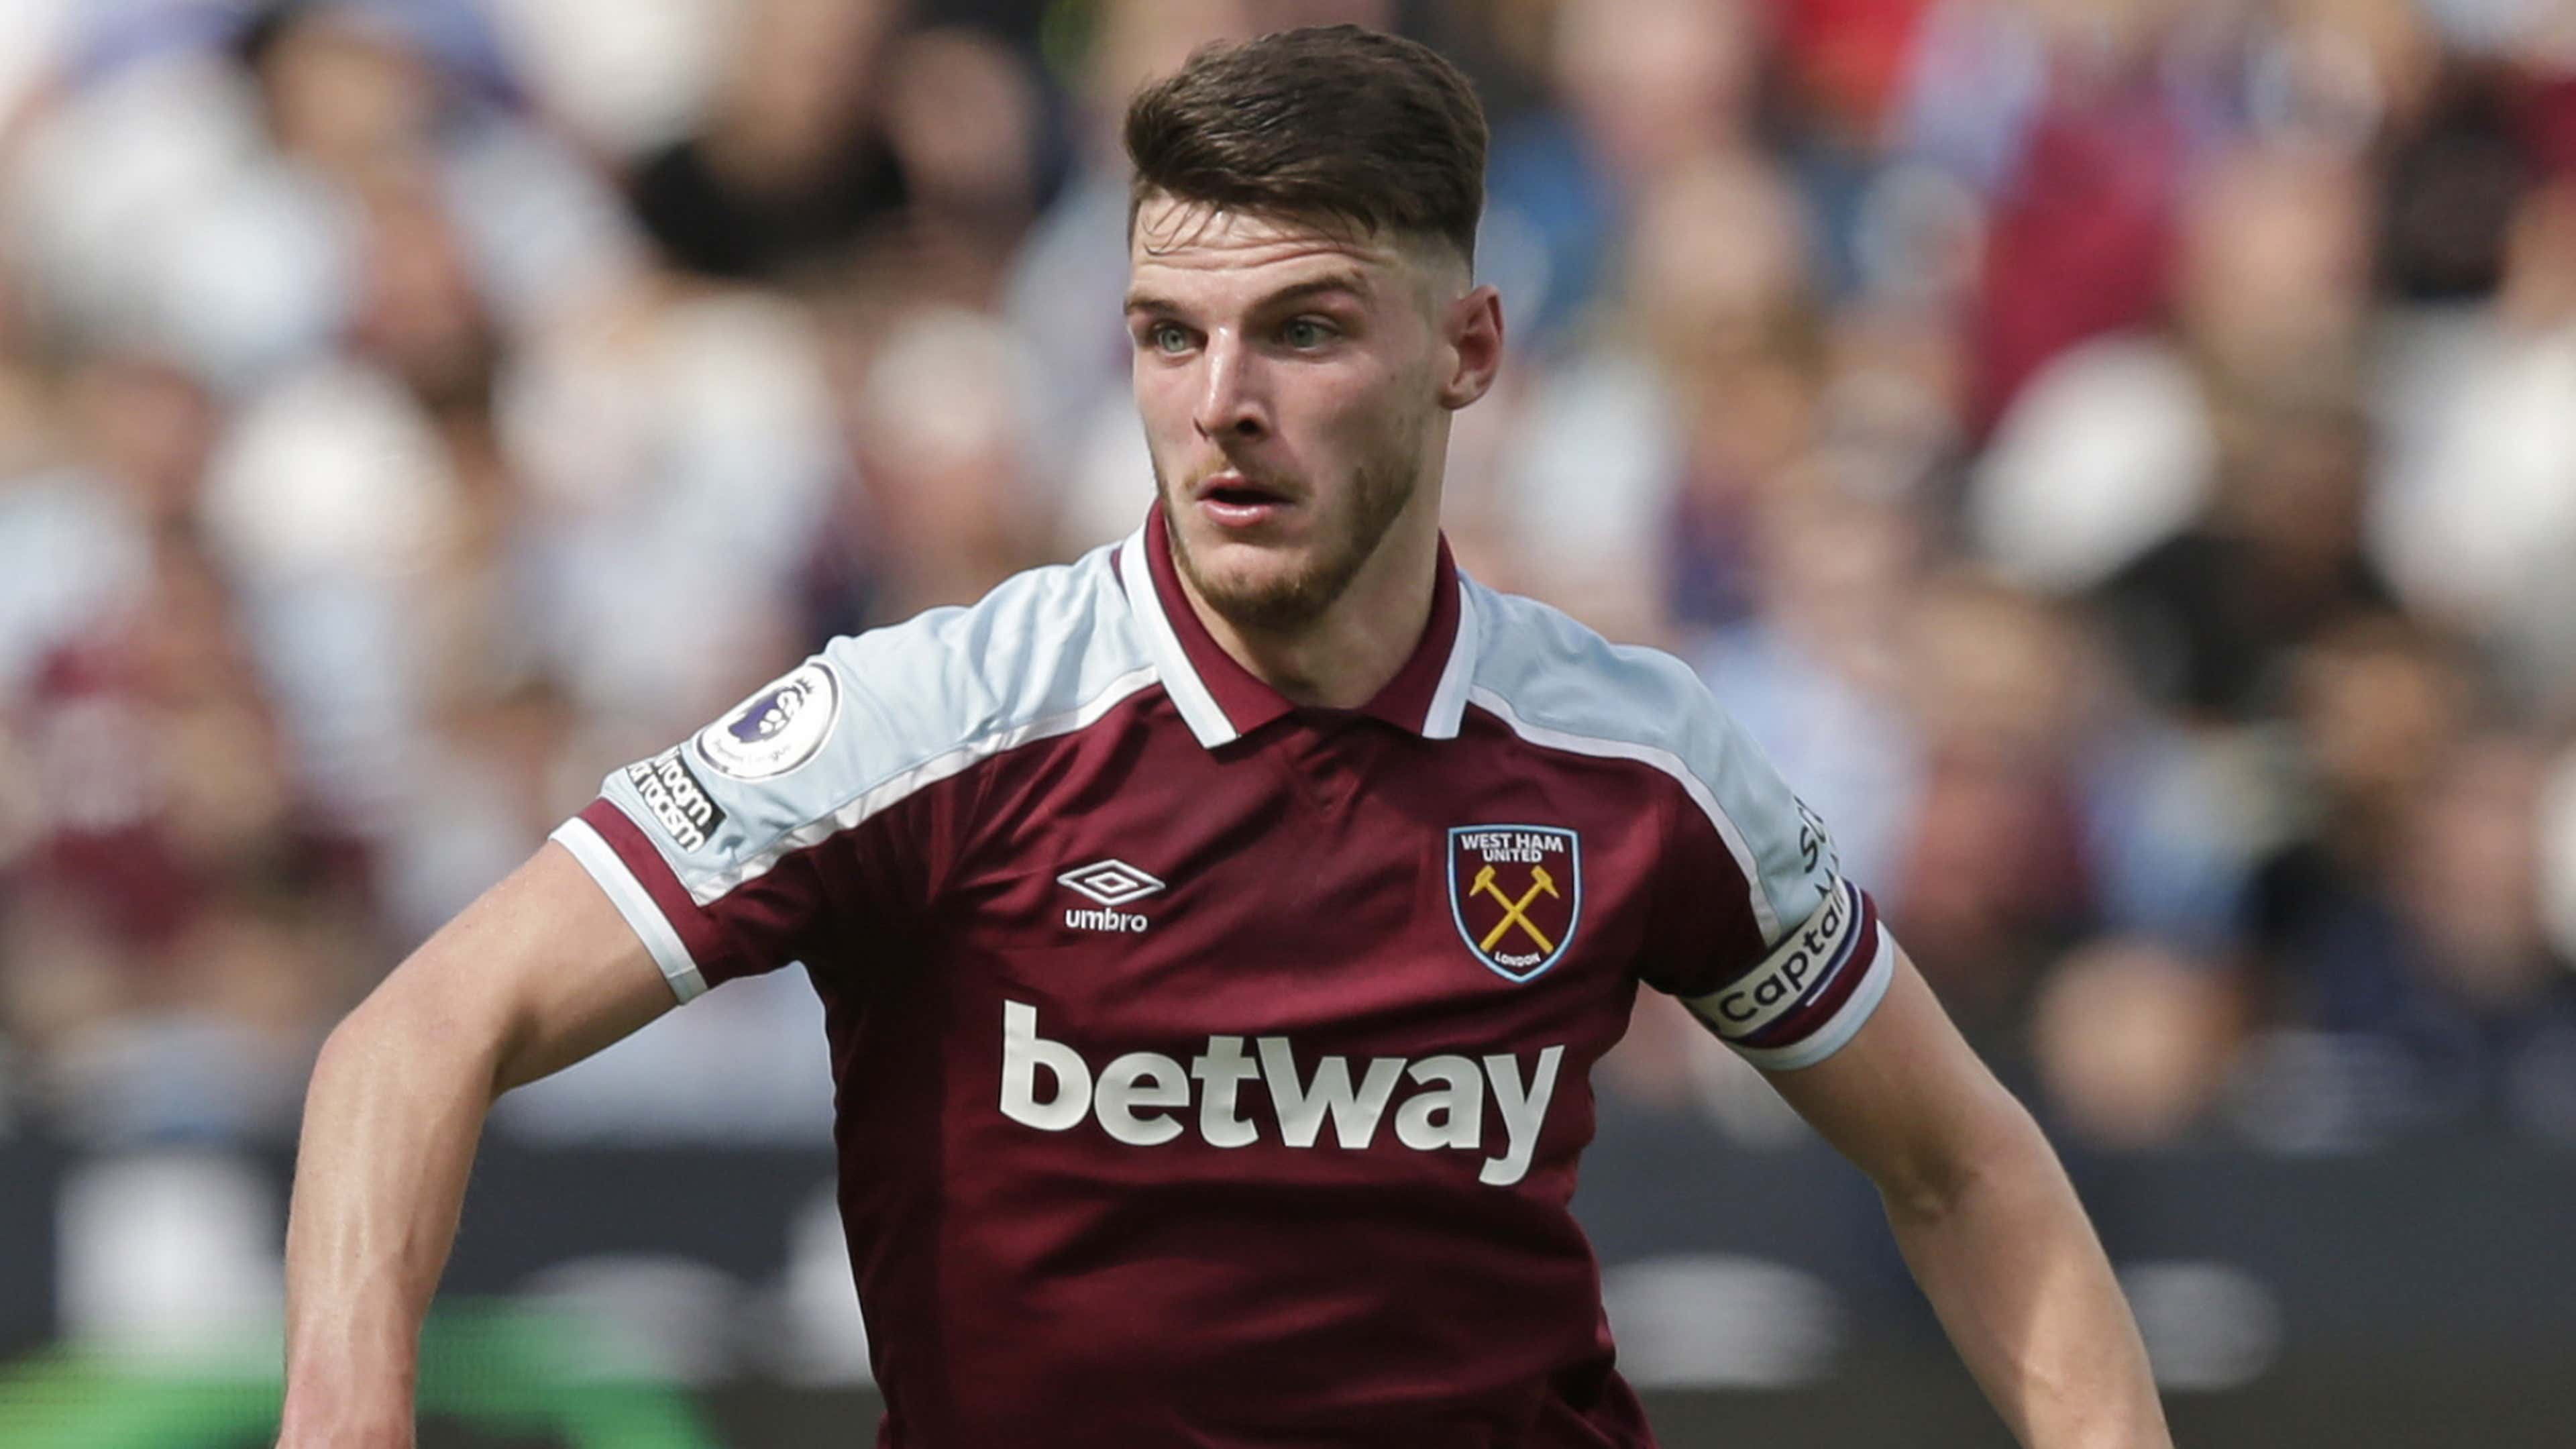 West Ham 'special place to play' says Rice, as Hammers maintain